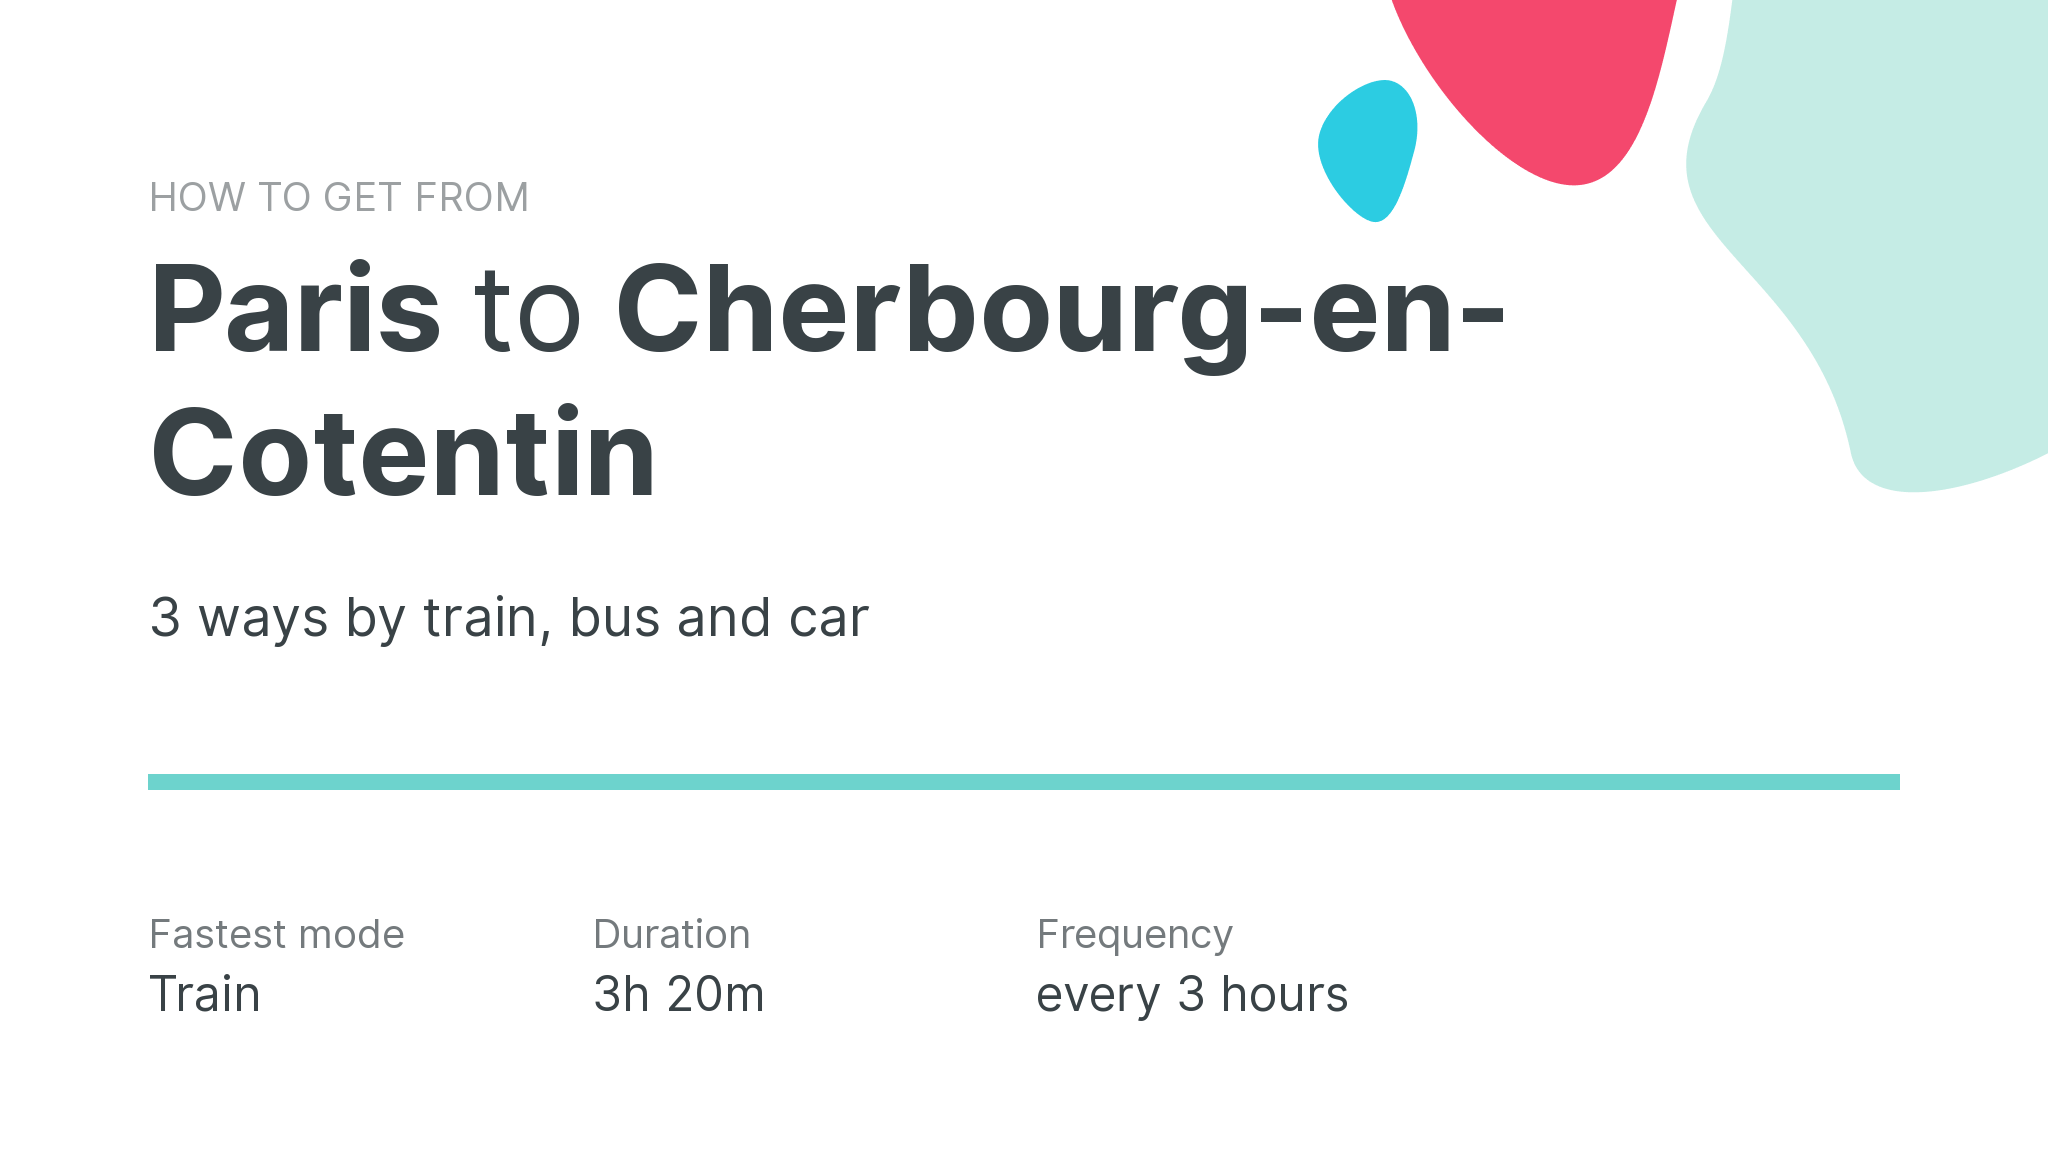 How do I get from Paris to Cherbourg-en-Cotentin